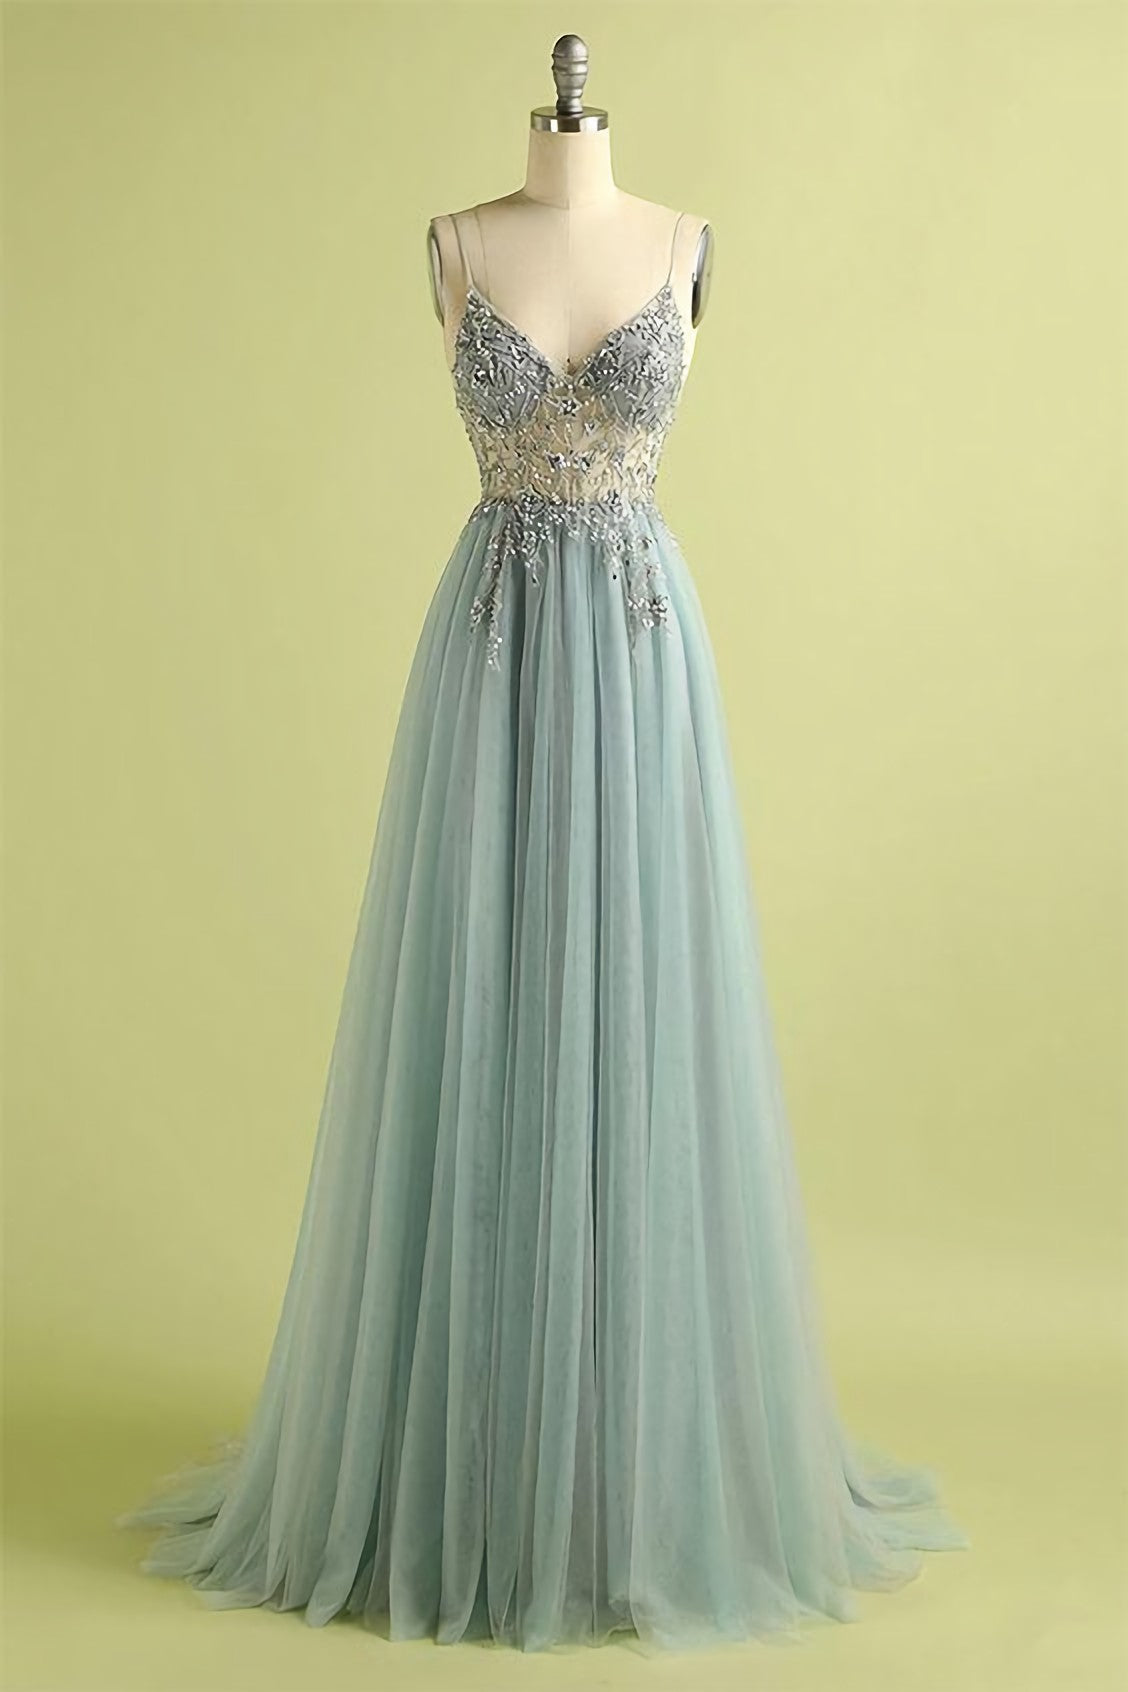 Long Corset Prom Dress, Inspiration Junior Corset Prom Gowns outfits, Prom Dresses Fitted